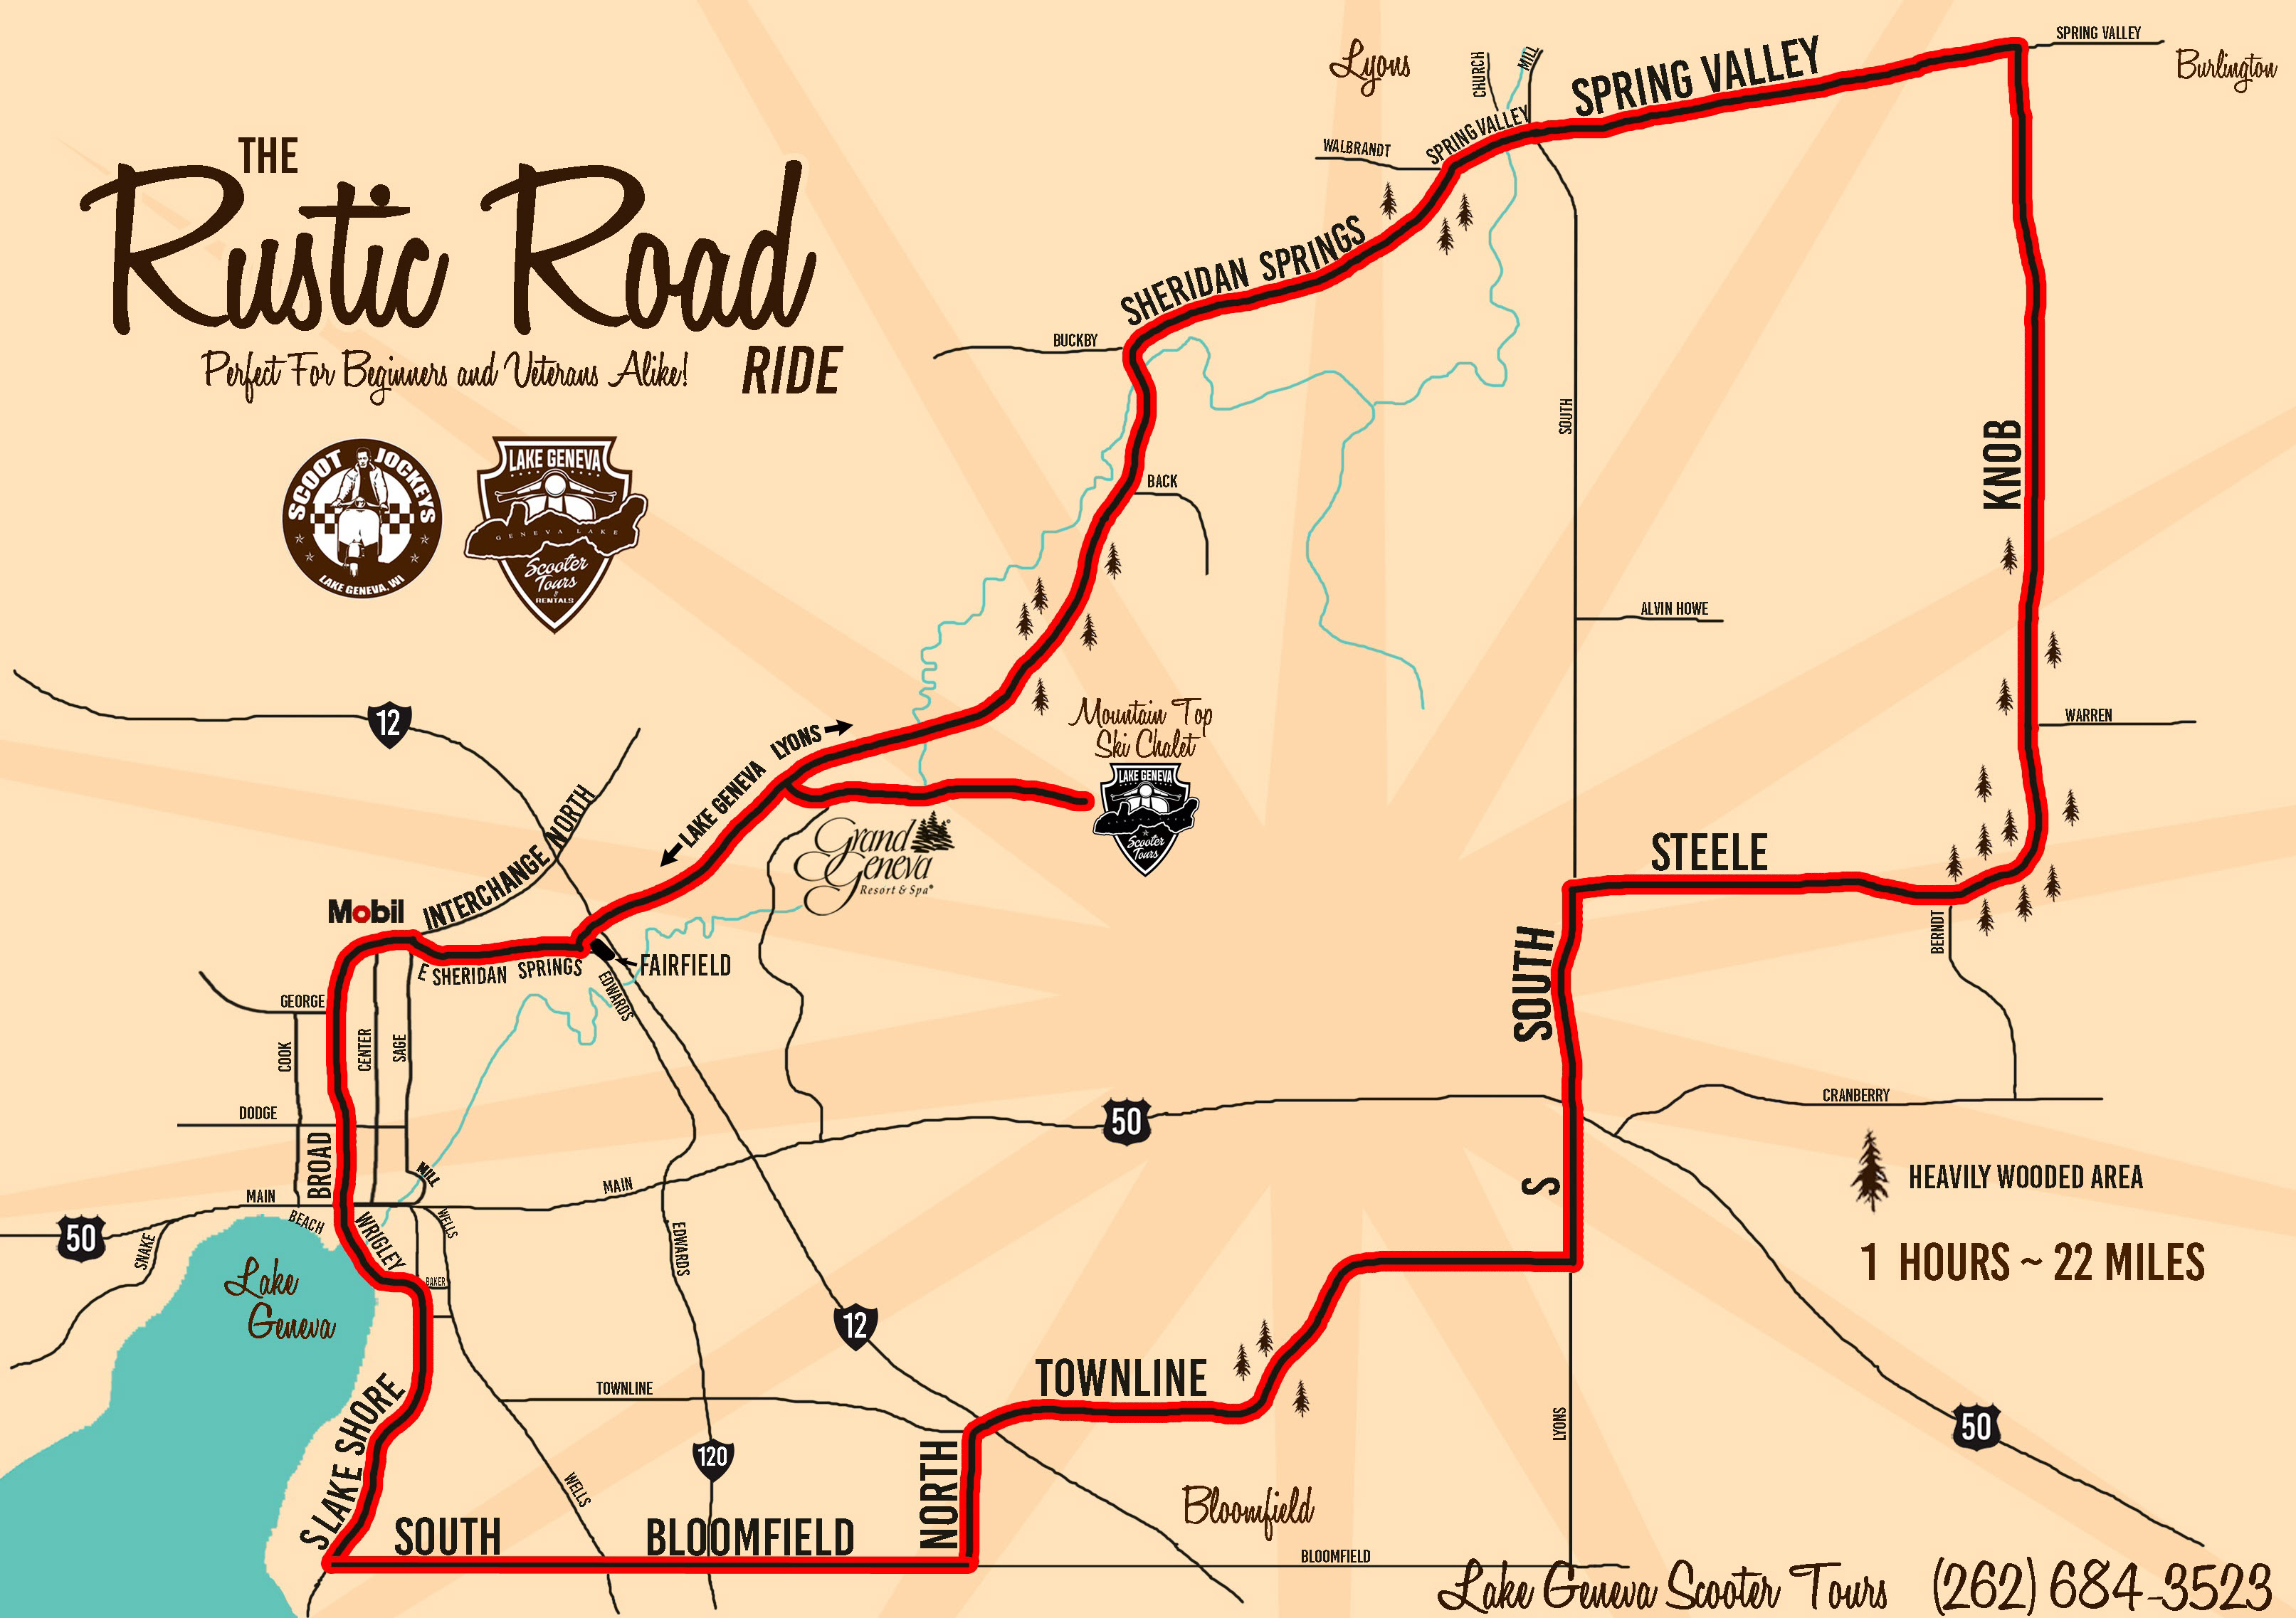 Lake Geneva Scooter Tours Map - The Rustic Road Ride